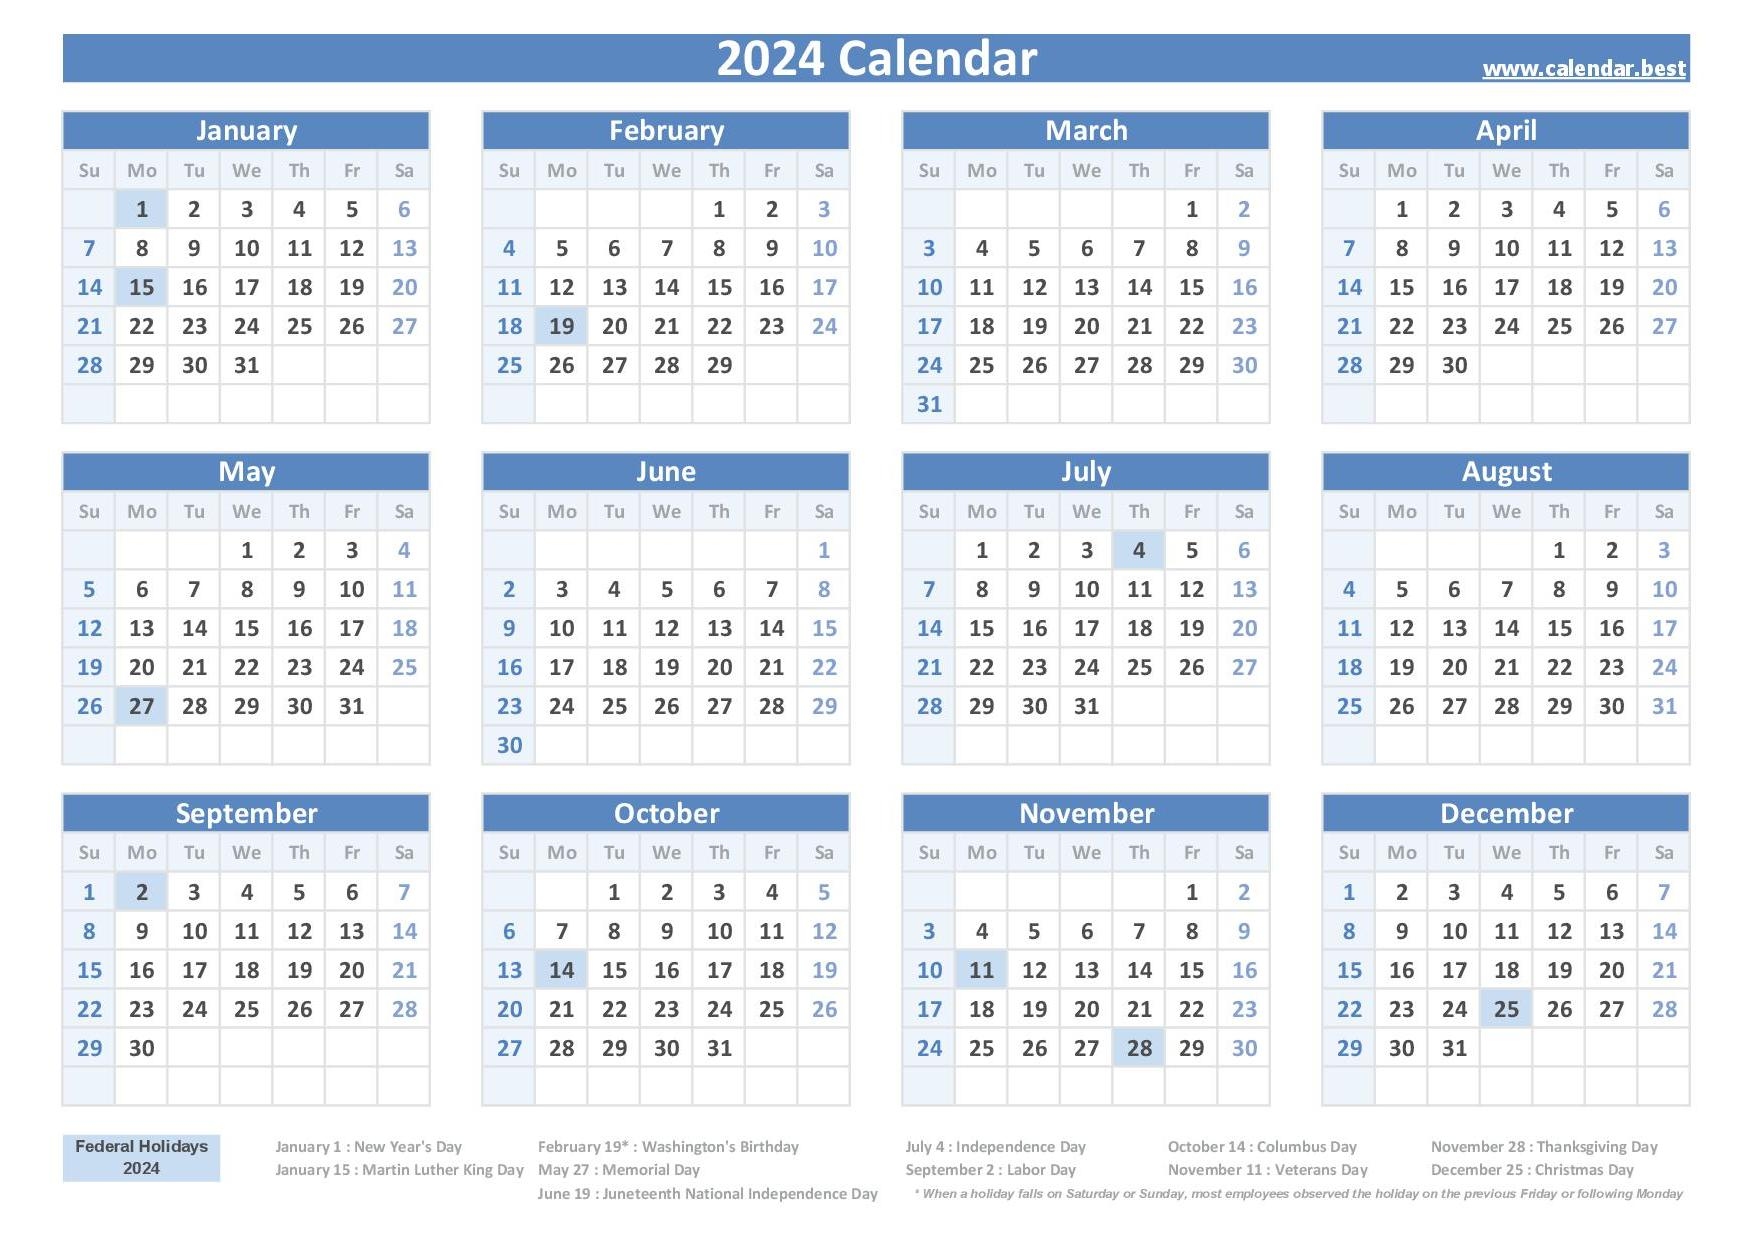 2024 Federal Holidays List And 2024 Calendar With Holidays To Print | Free Printable 2024 Federal Holiday Calendar Word